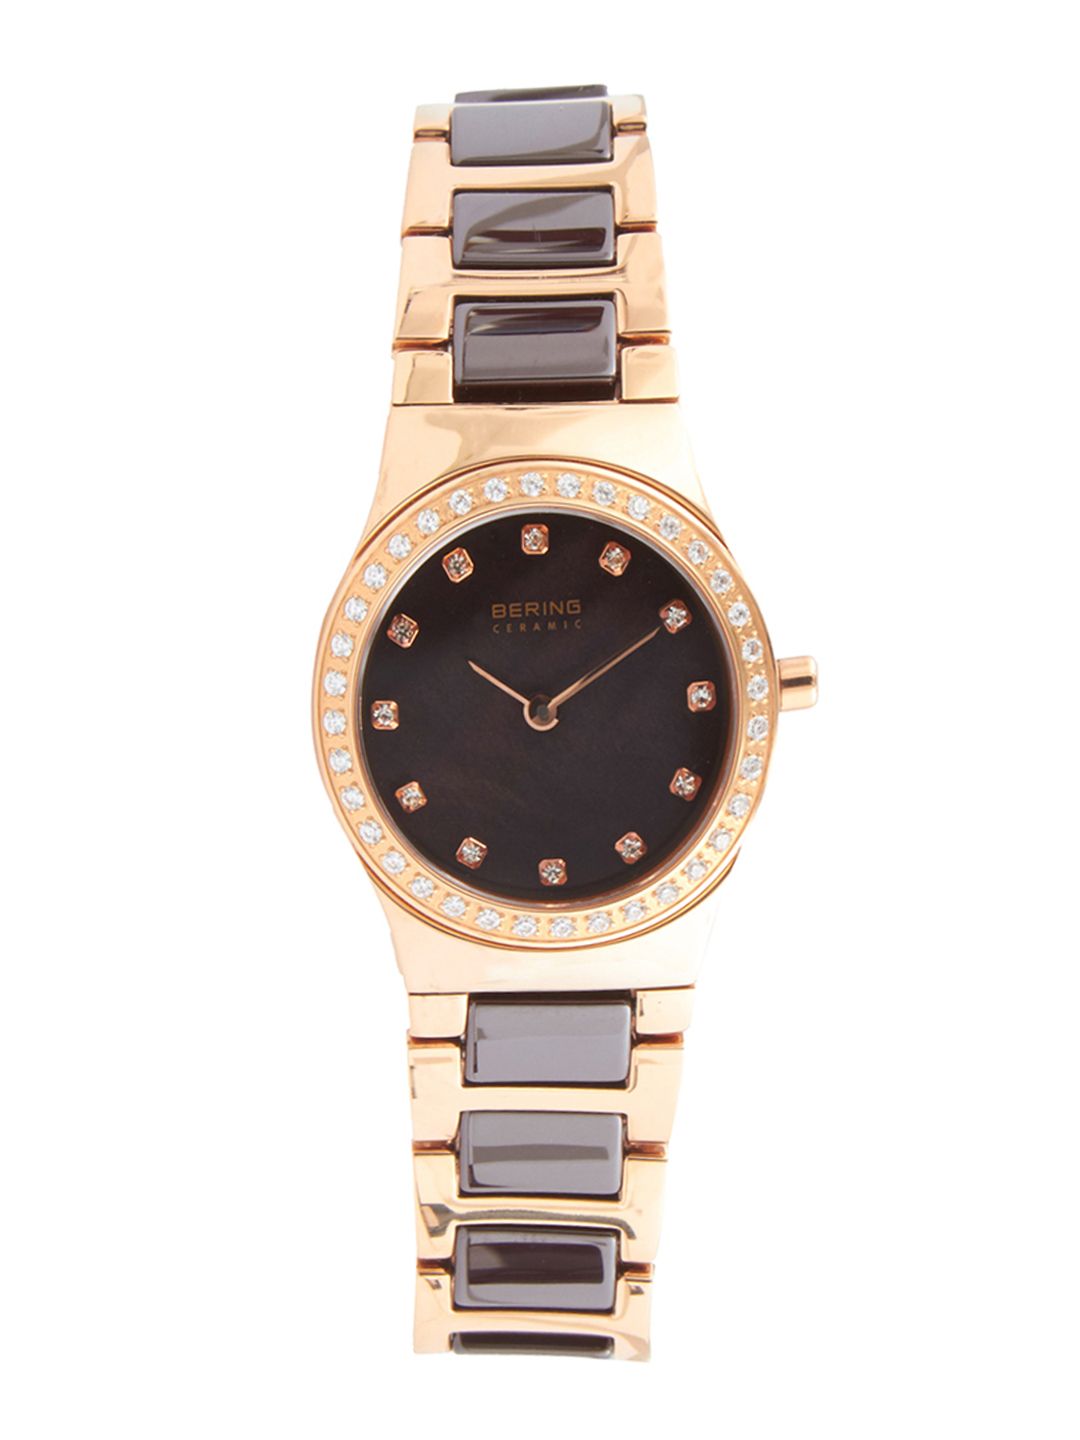 BERING Women Brown Ceramic Sapphire Crystal Analogue Watch 32426-765 Price in India